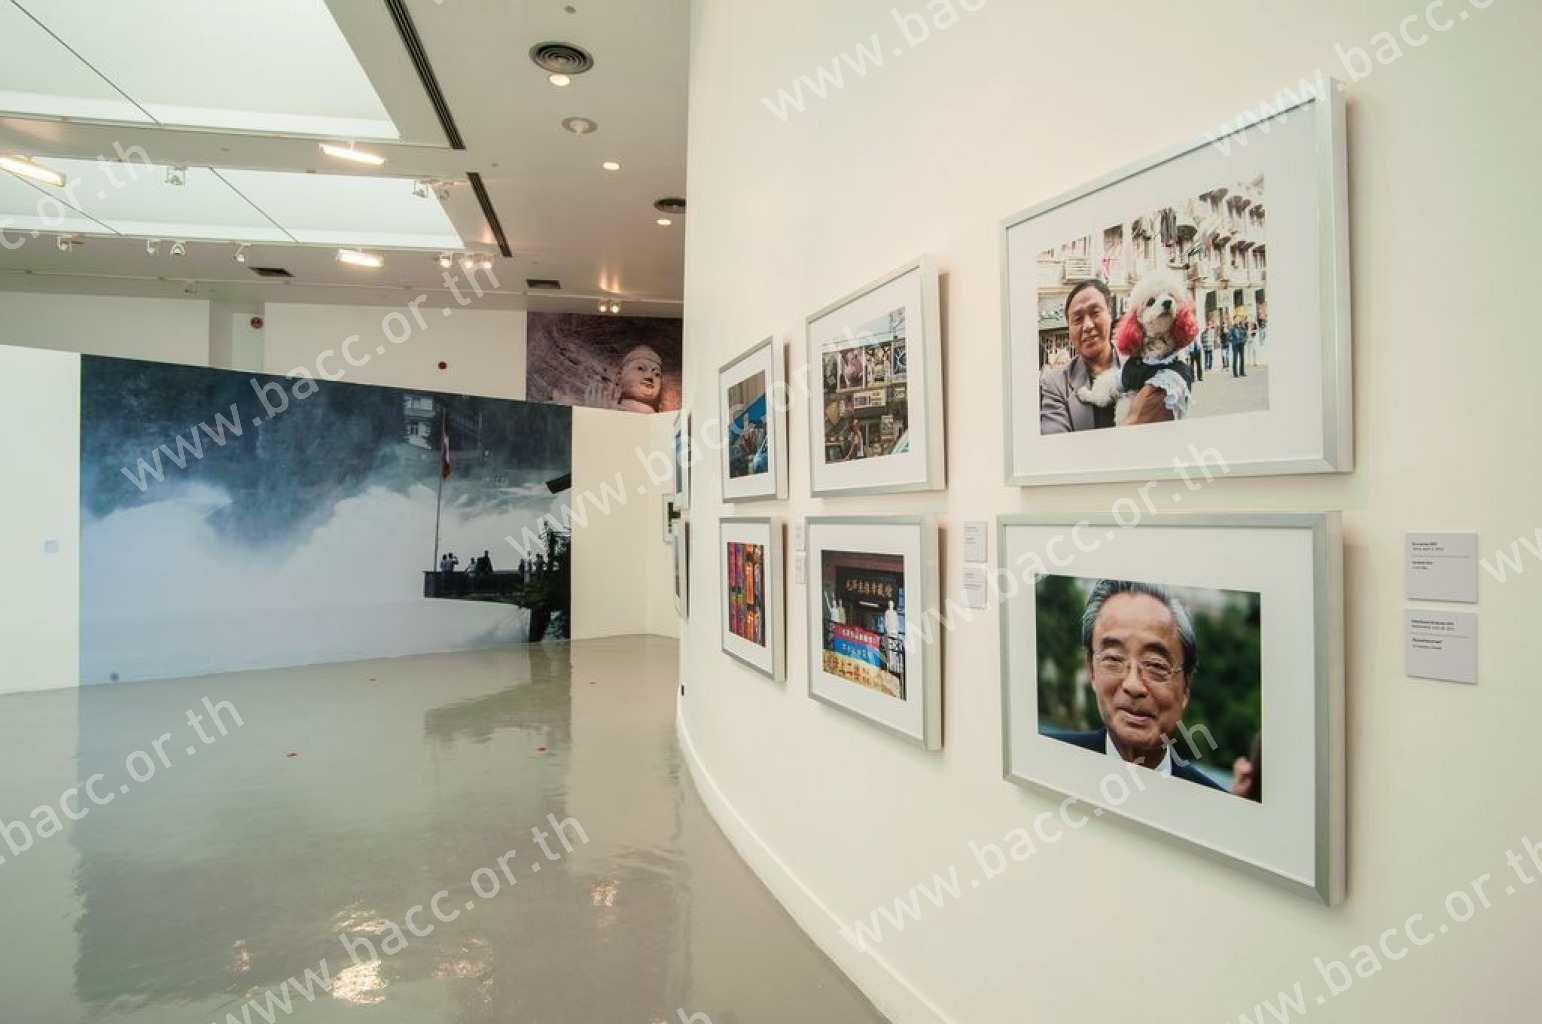 A Photography Exhibition by Her Royal Highness Princess Maha Chakri Sirindhorn: Clairvoyance